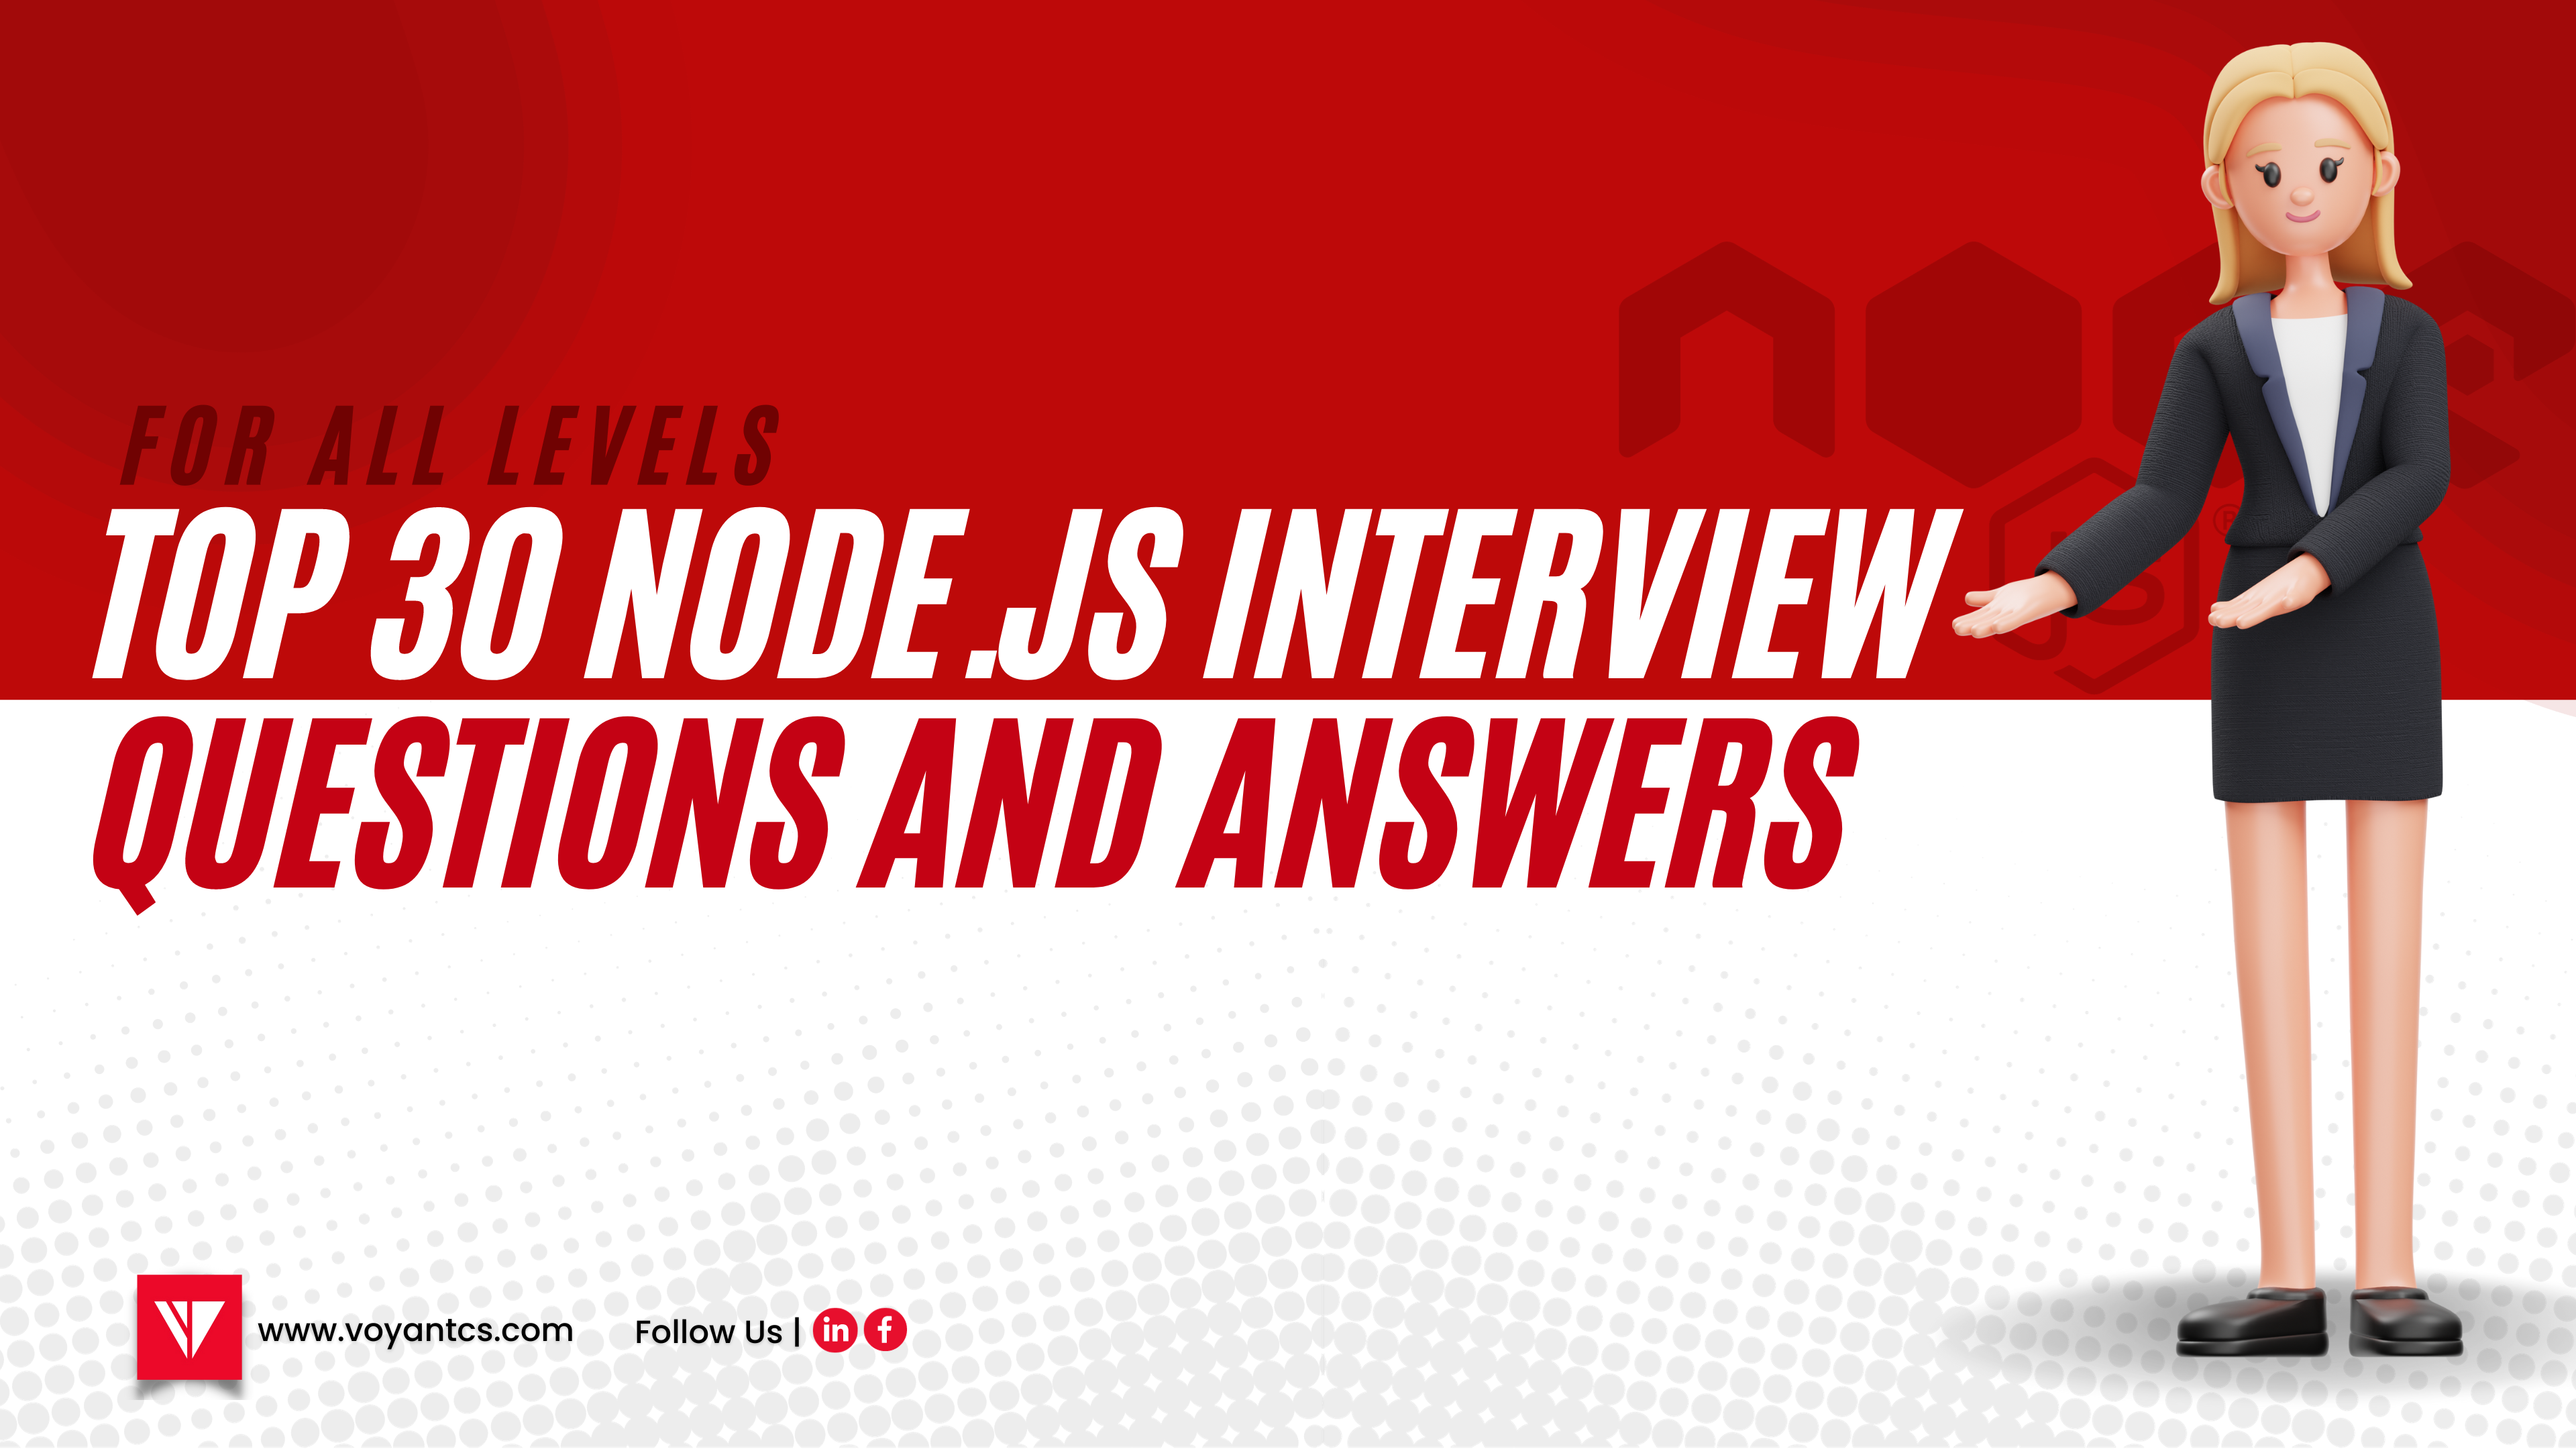 Voyantt CS - Top 30 Node JS interview questions and answers for all levels